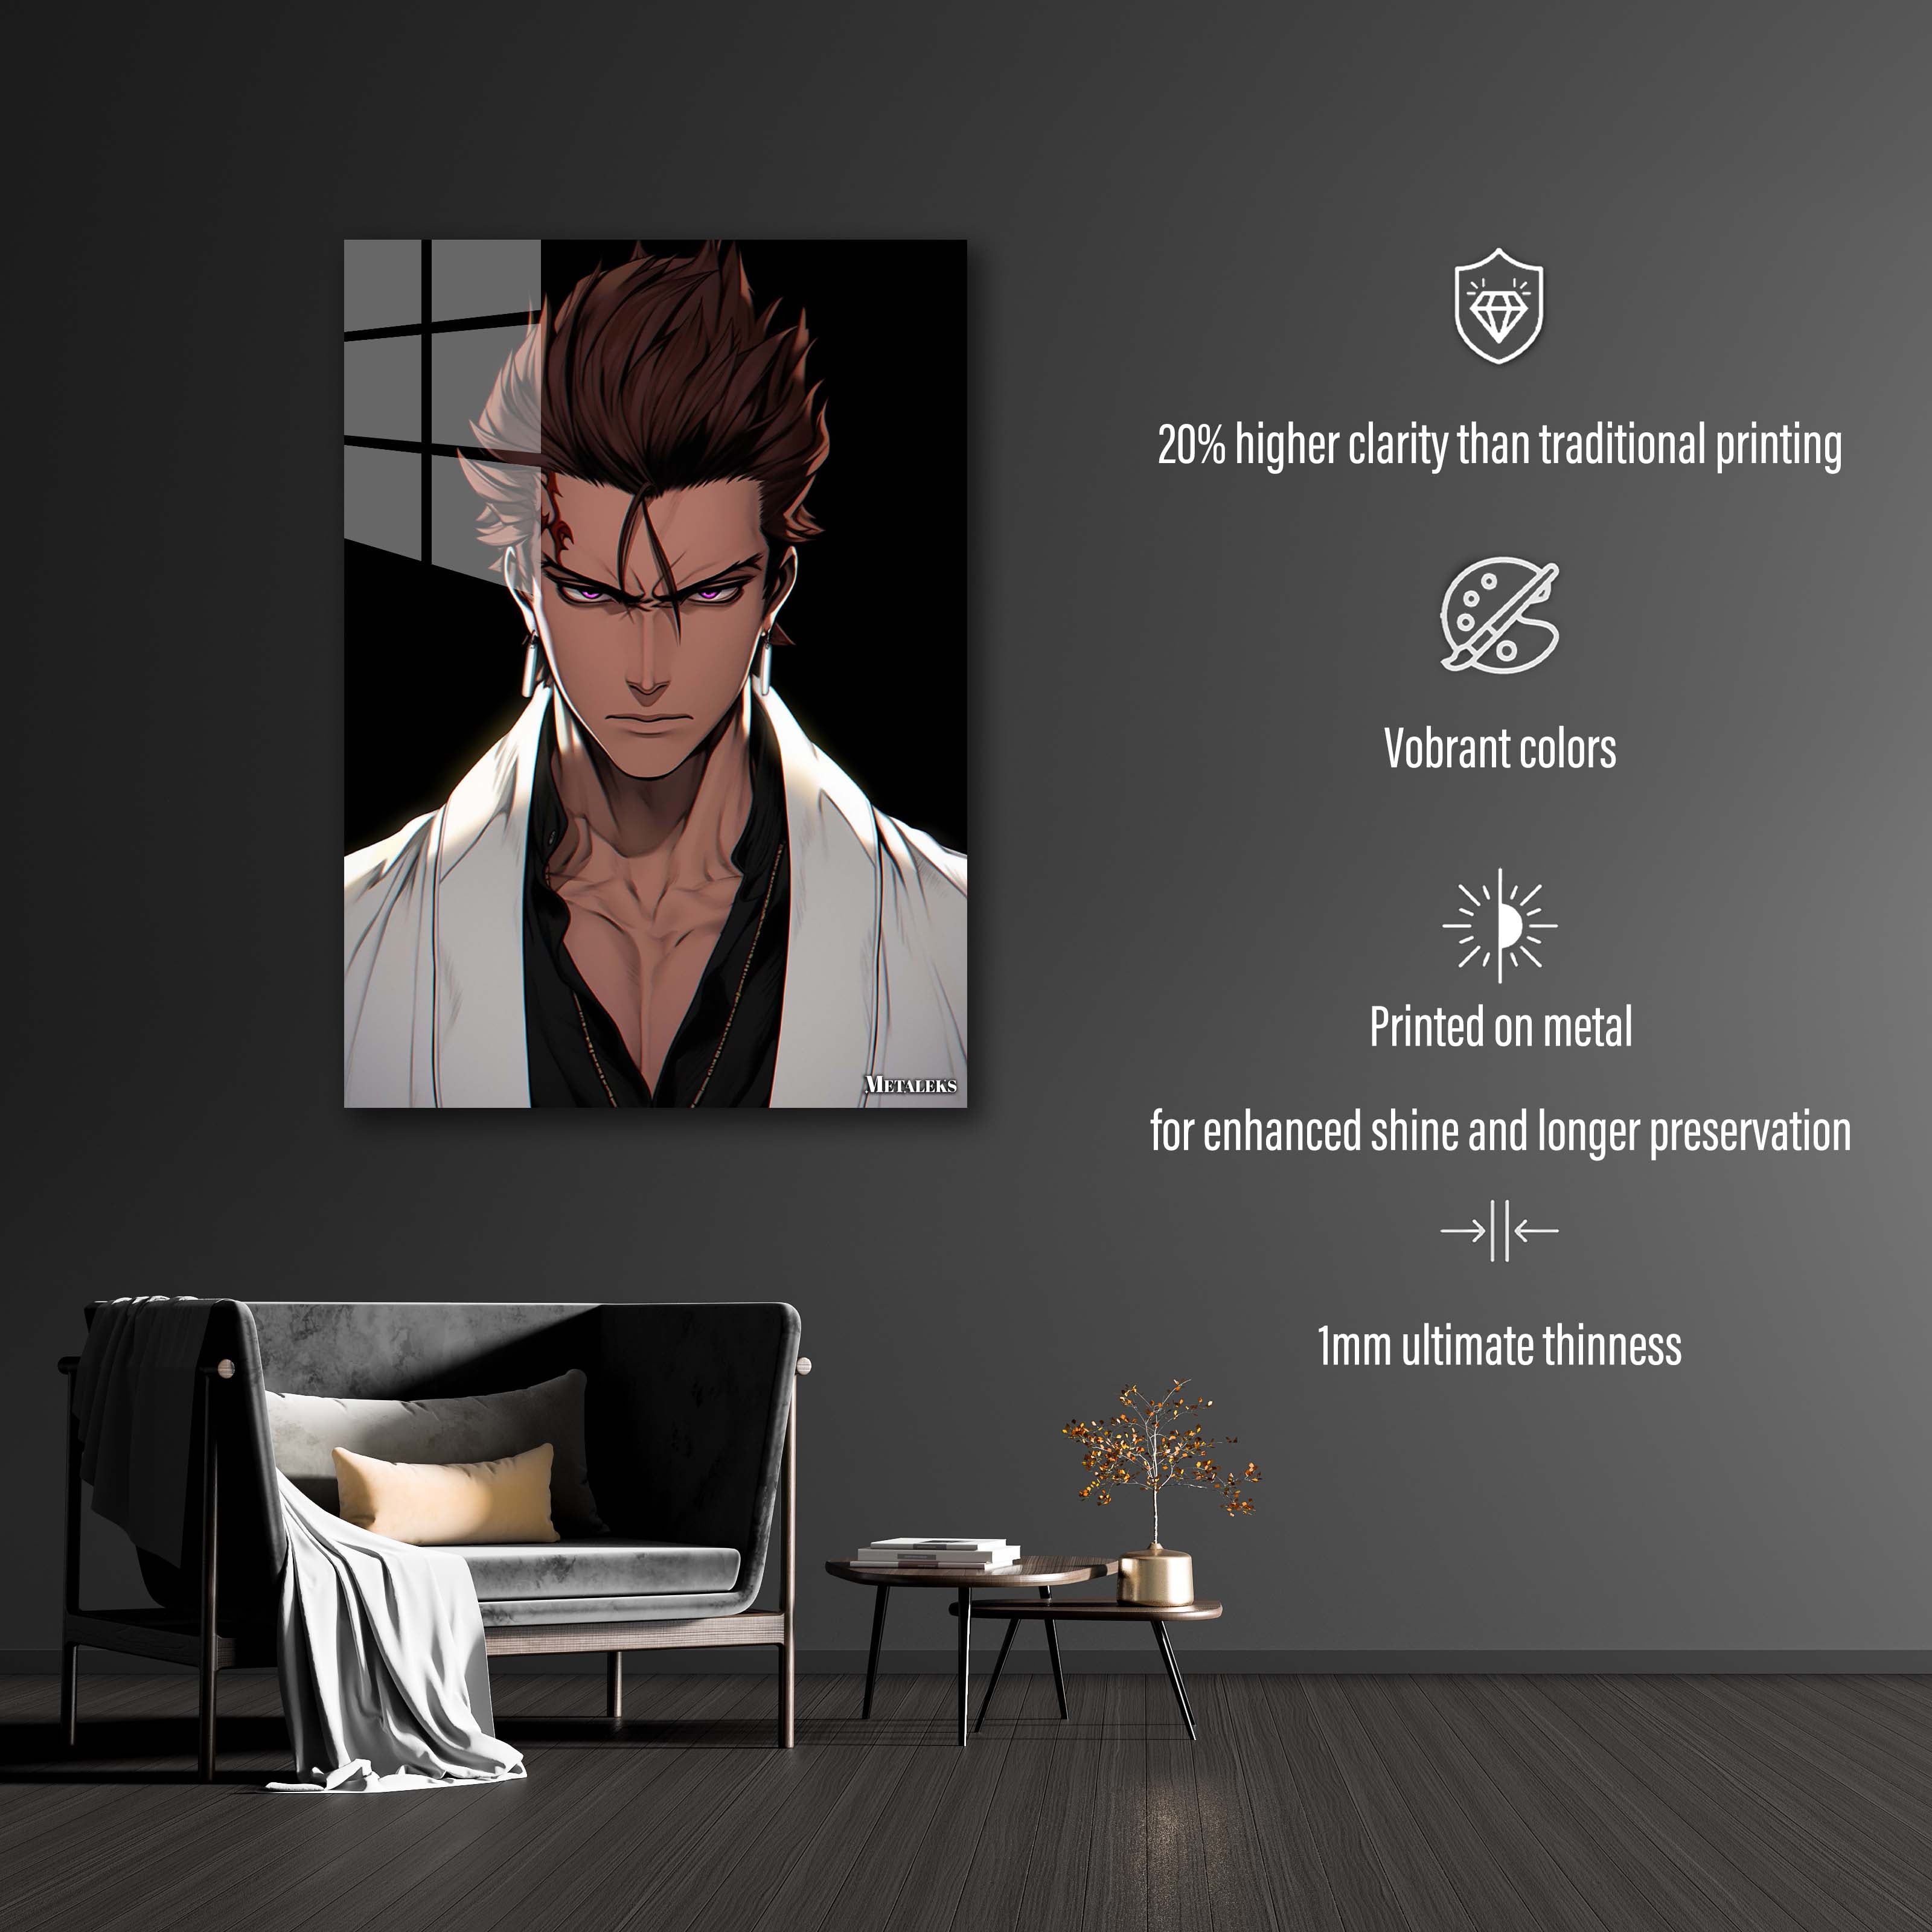 Soul Society's Puppetmaster_ Aizen's Shattered Illusions-designed by @theanimecrossover